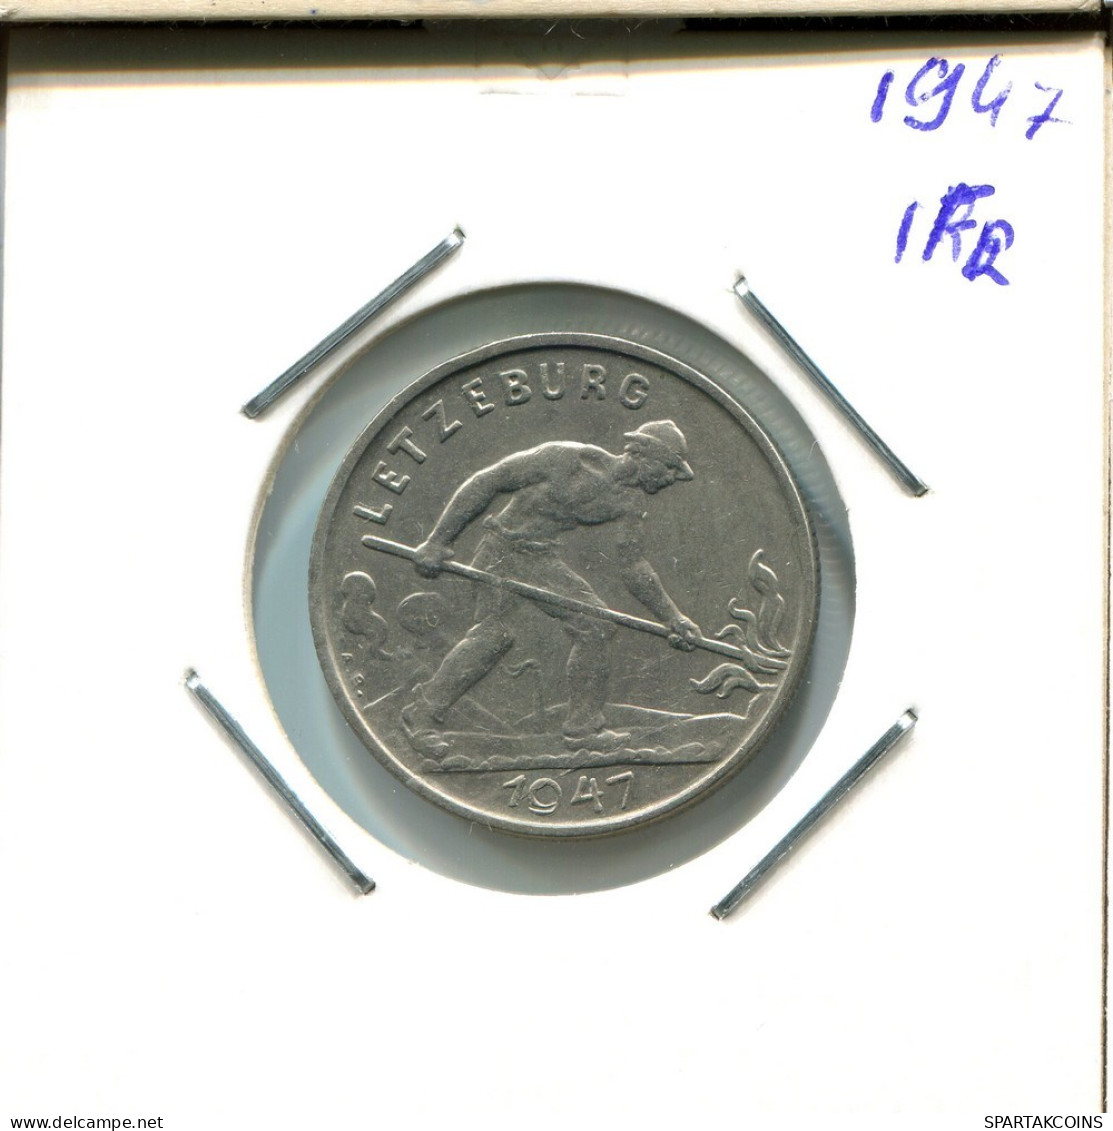 1 FRANC 1947 LUXEMBOURG Coin #AT201.U.A - Luxemburg